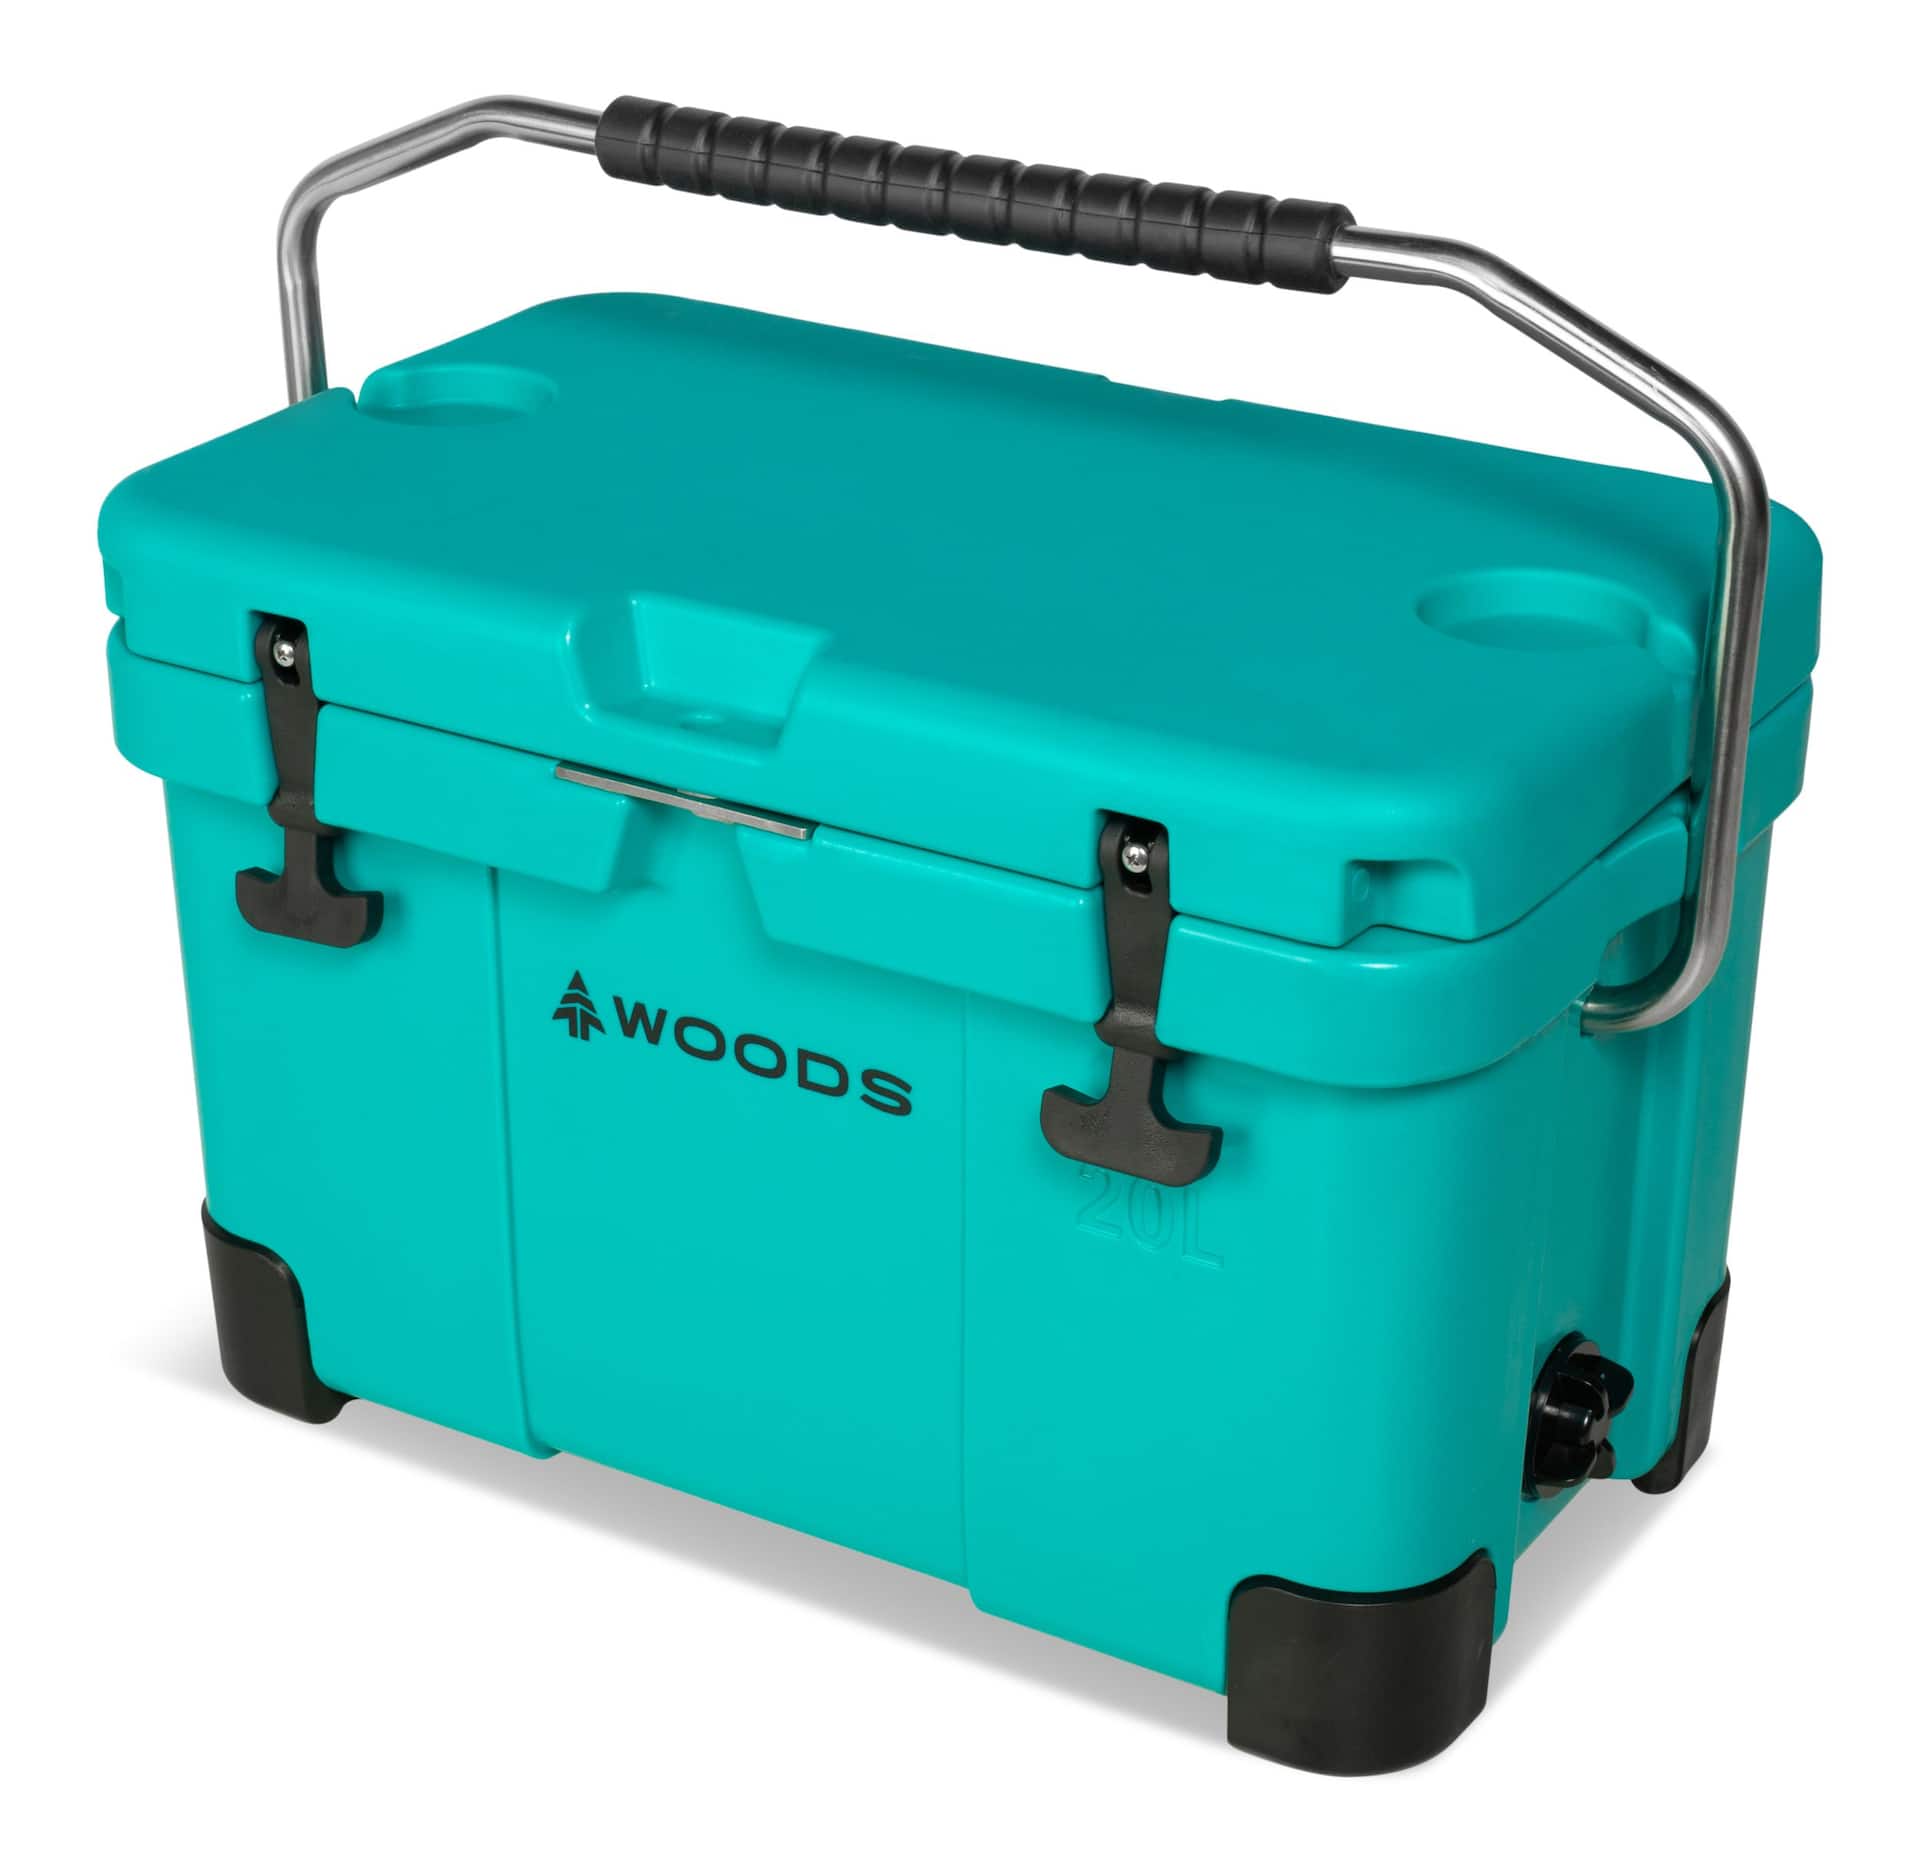 Woods ARCTIC Roto-Moulded Cooler with Handle, 20-L, Turquoise